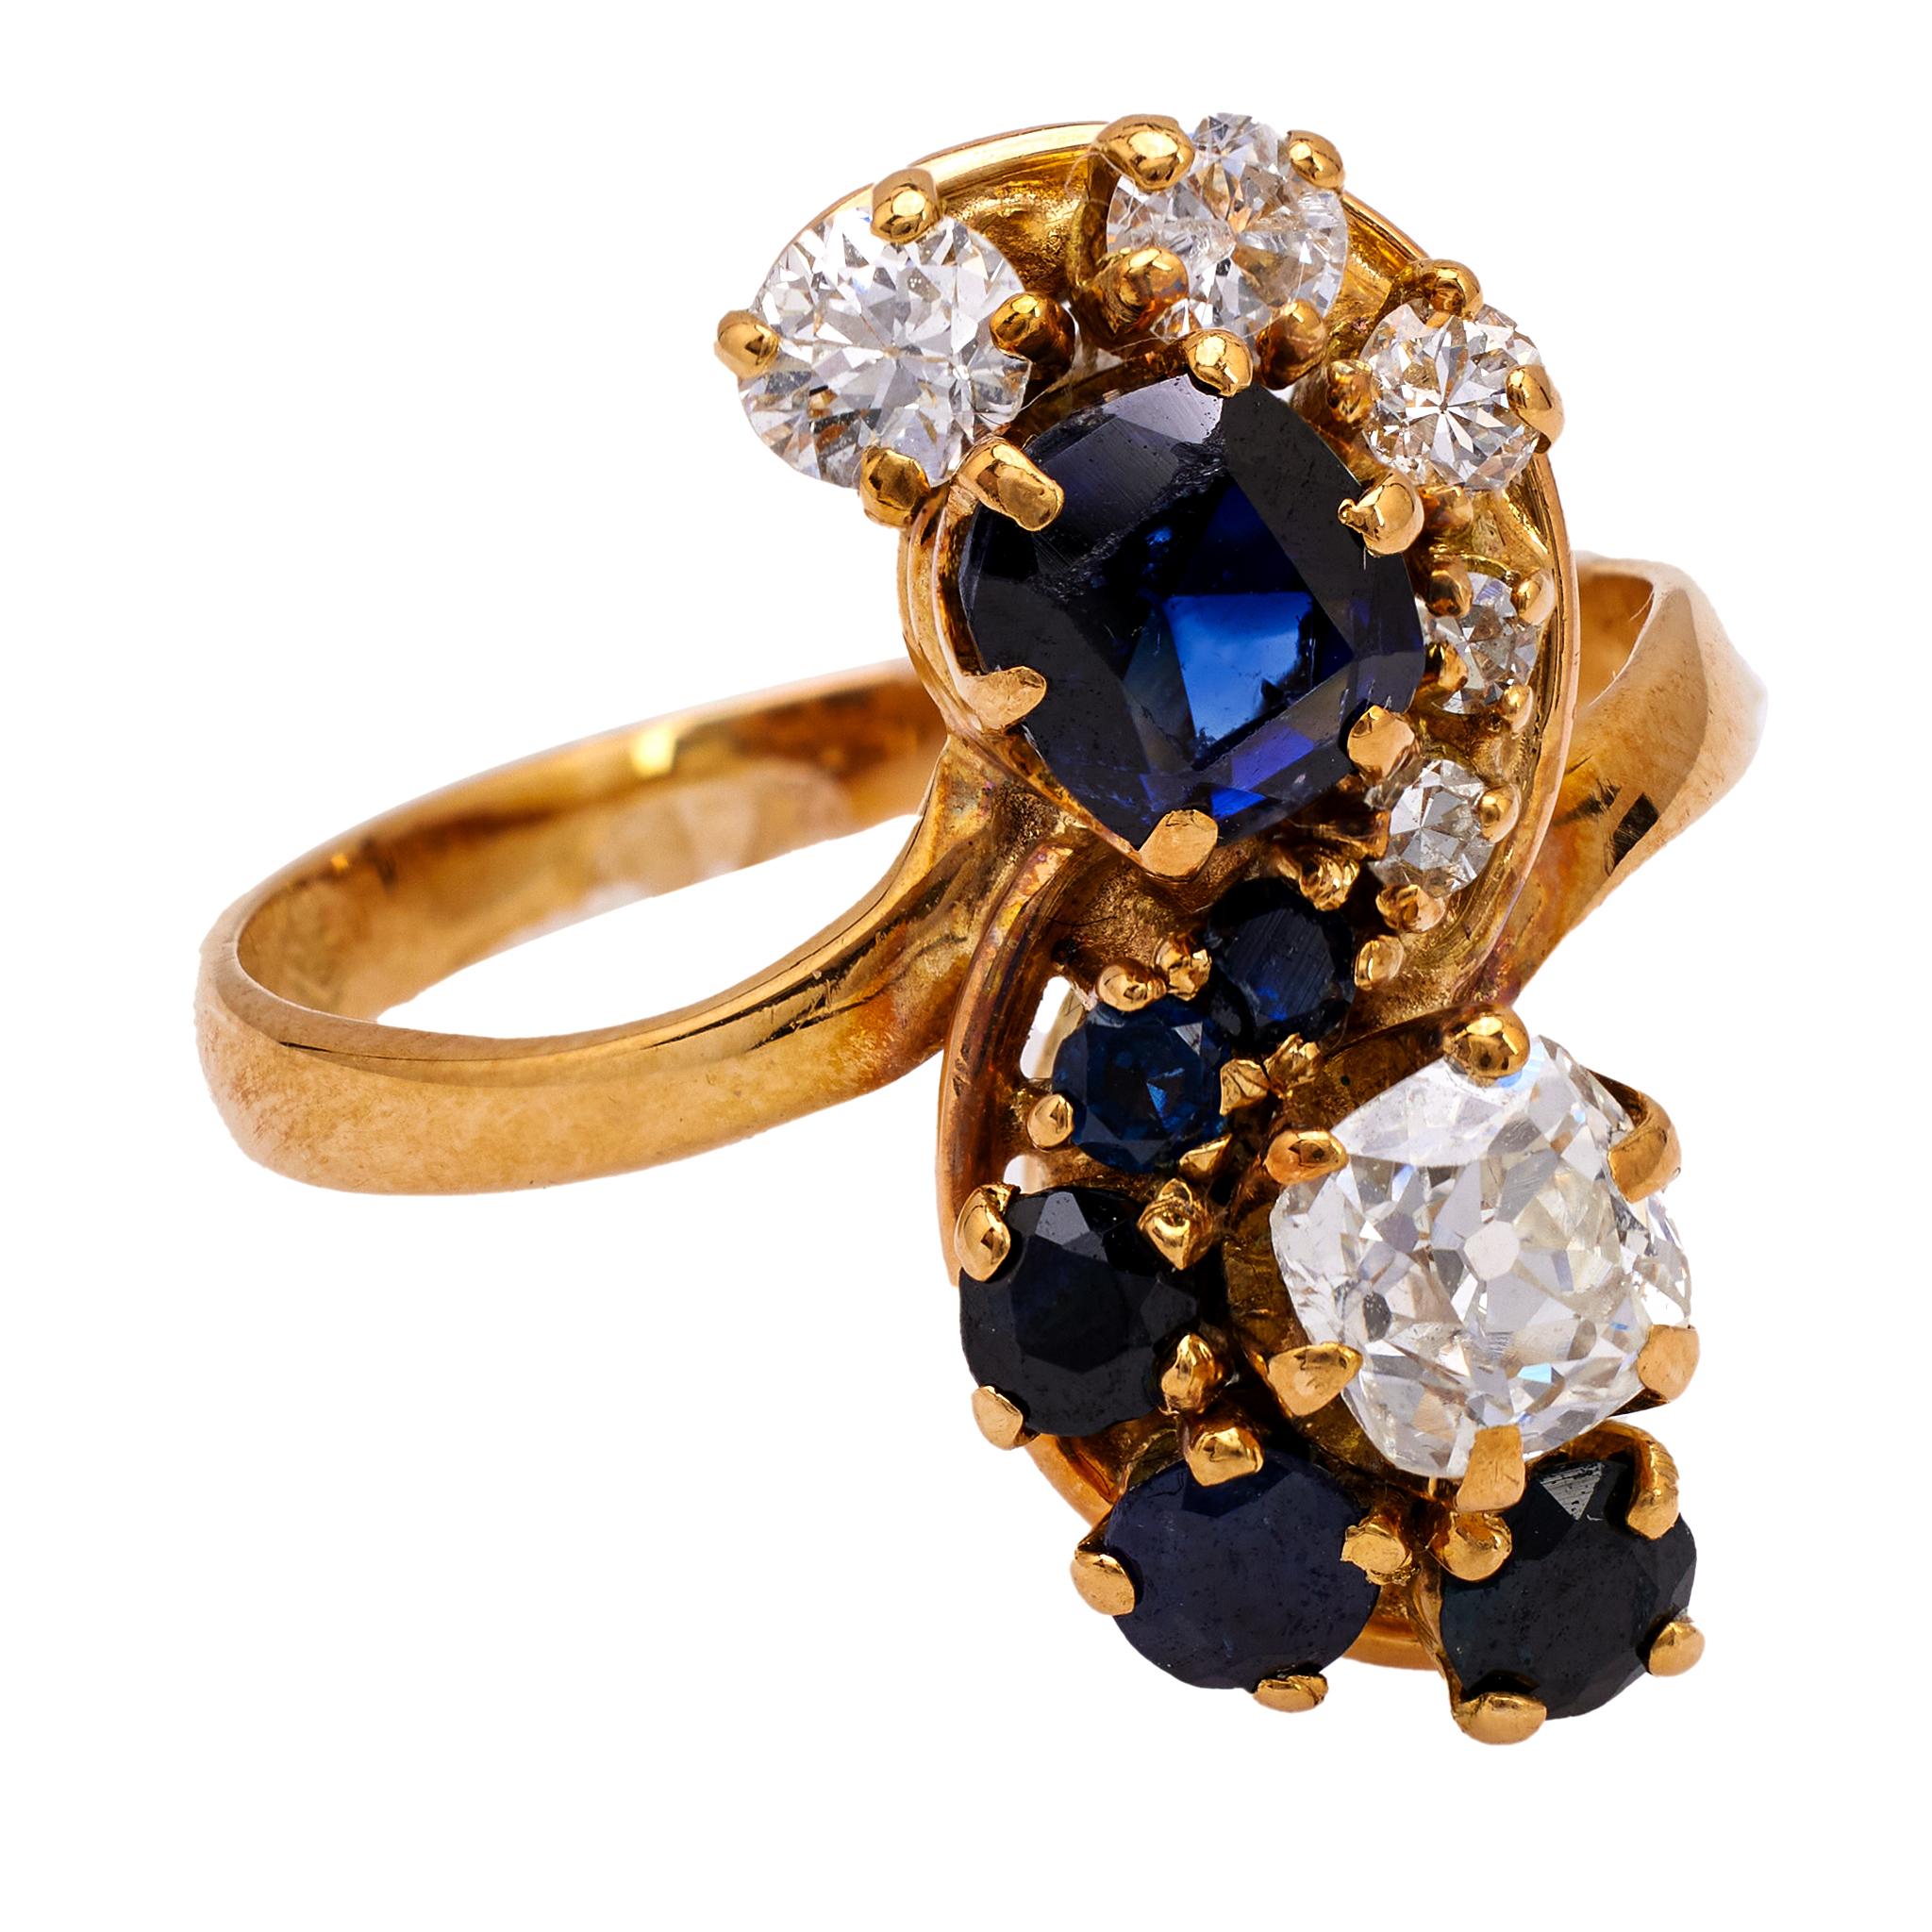 Women's or Men's Belle Époque French Diamond and Sapphire 18k Yellow Gold Toi et Moi Ring For Sale